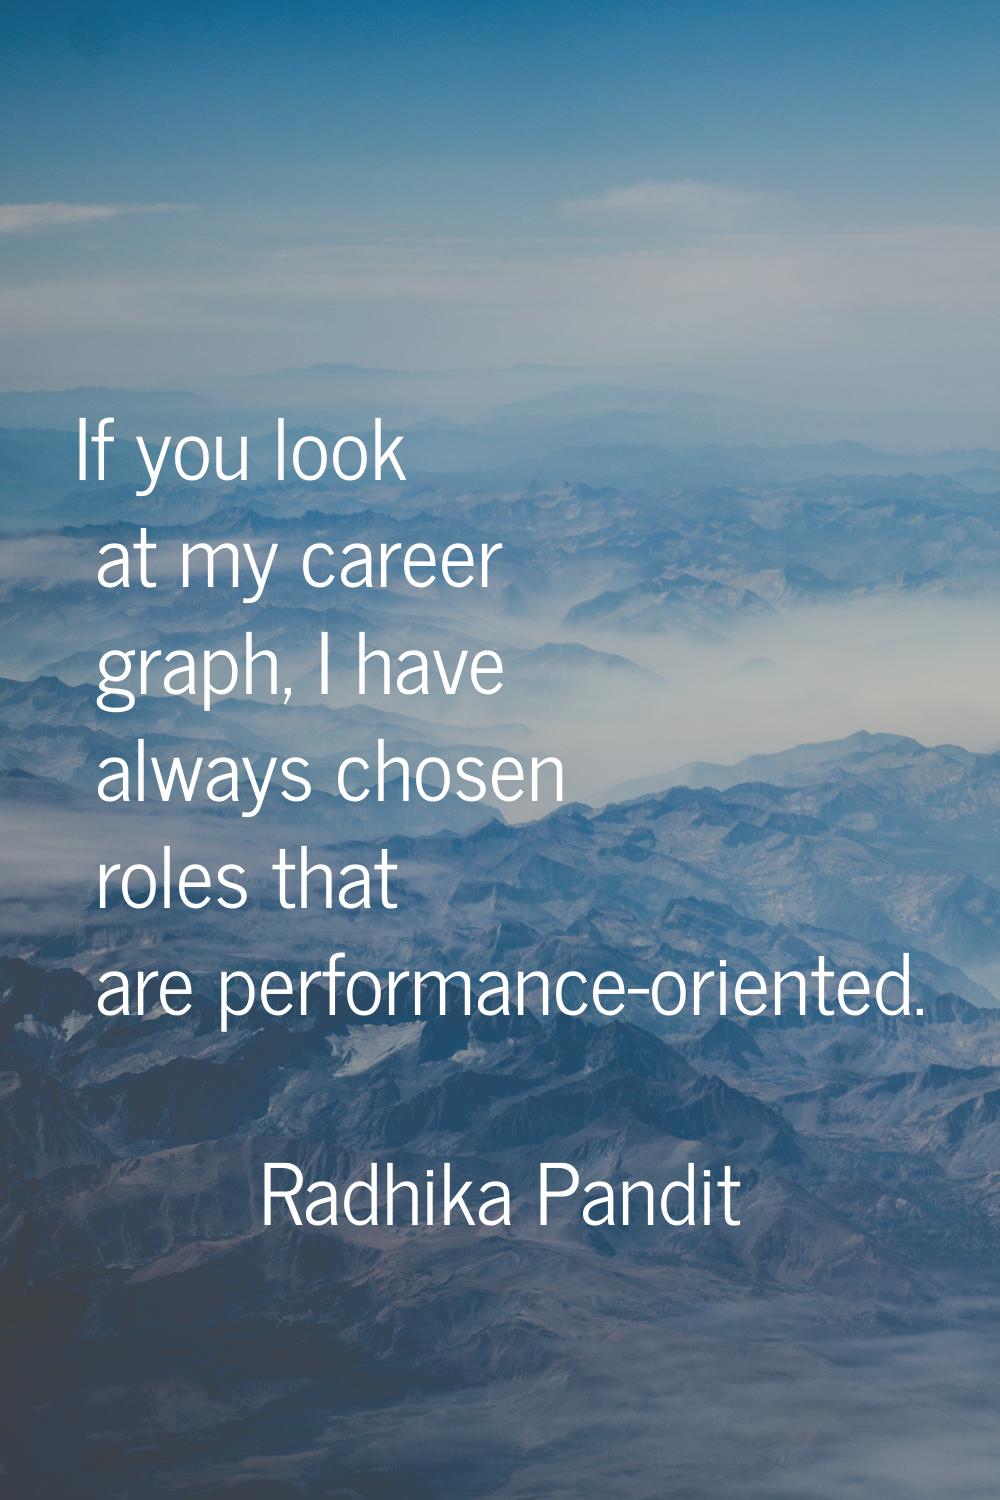 If you look at my career graph, I have always chosen roles that are performance-oriented.